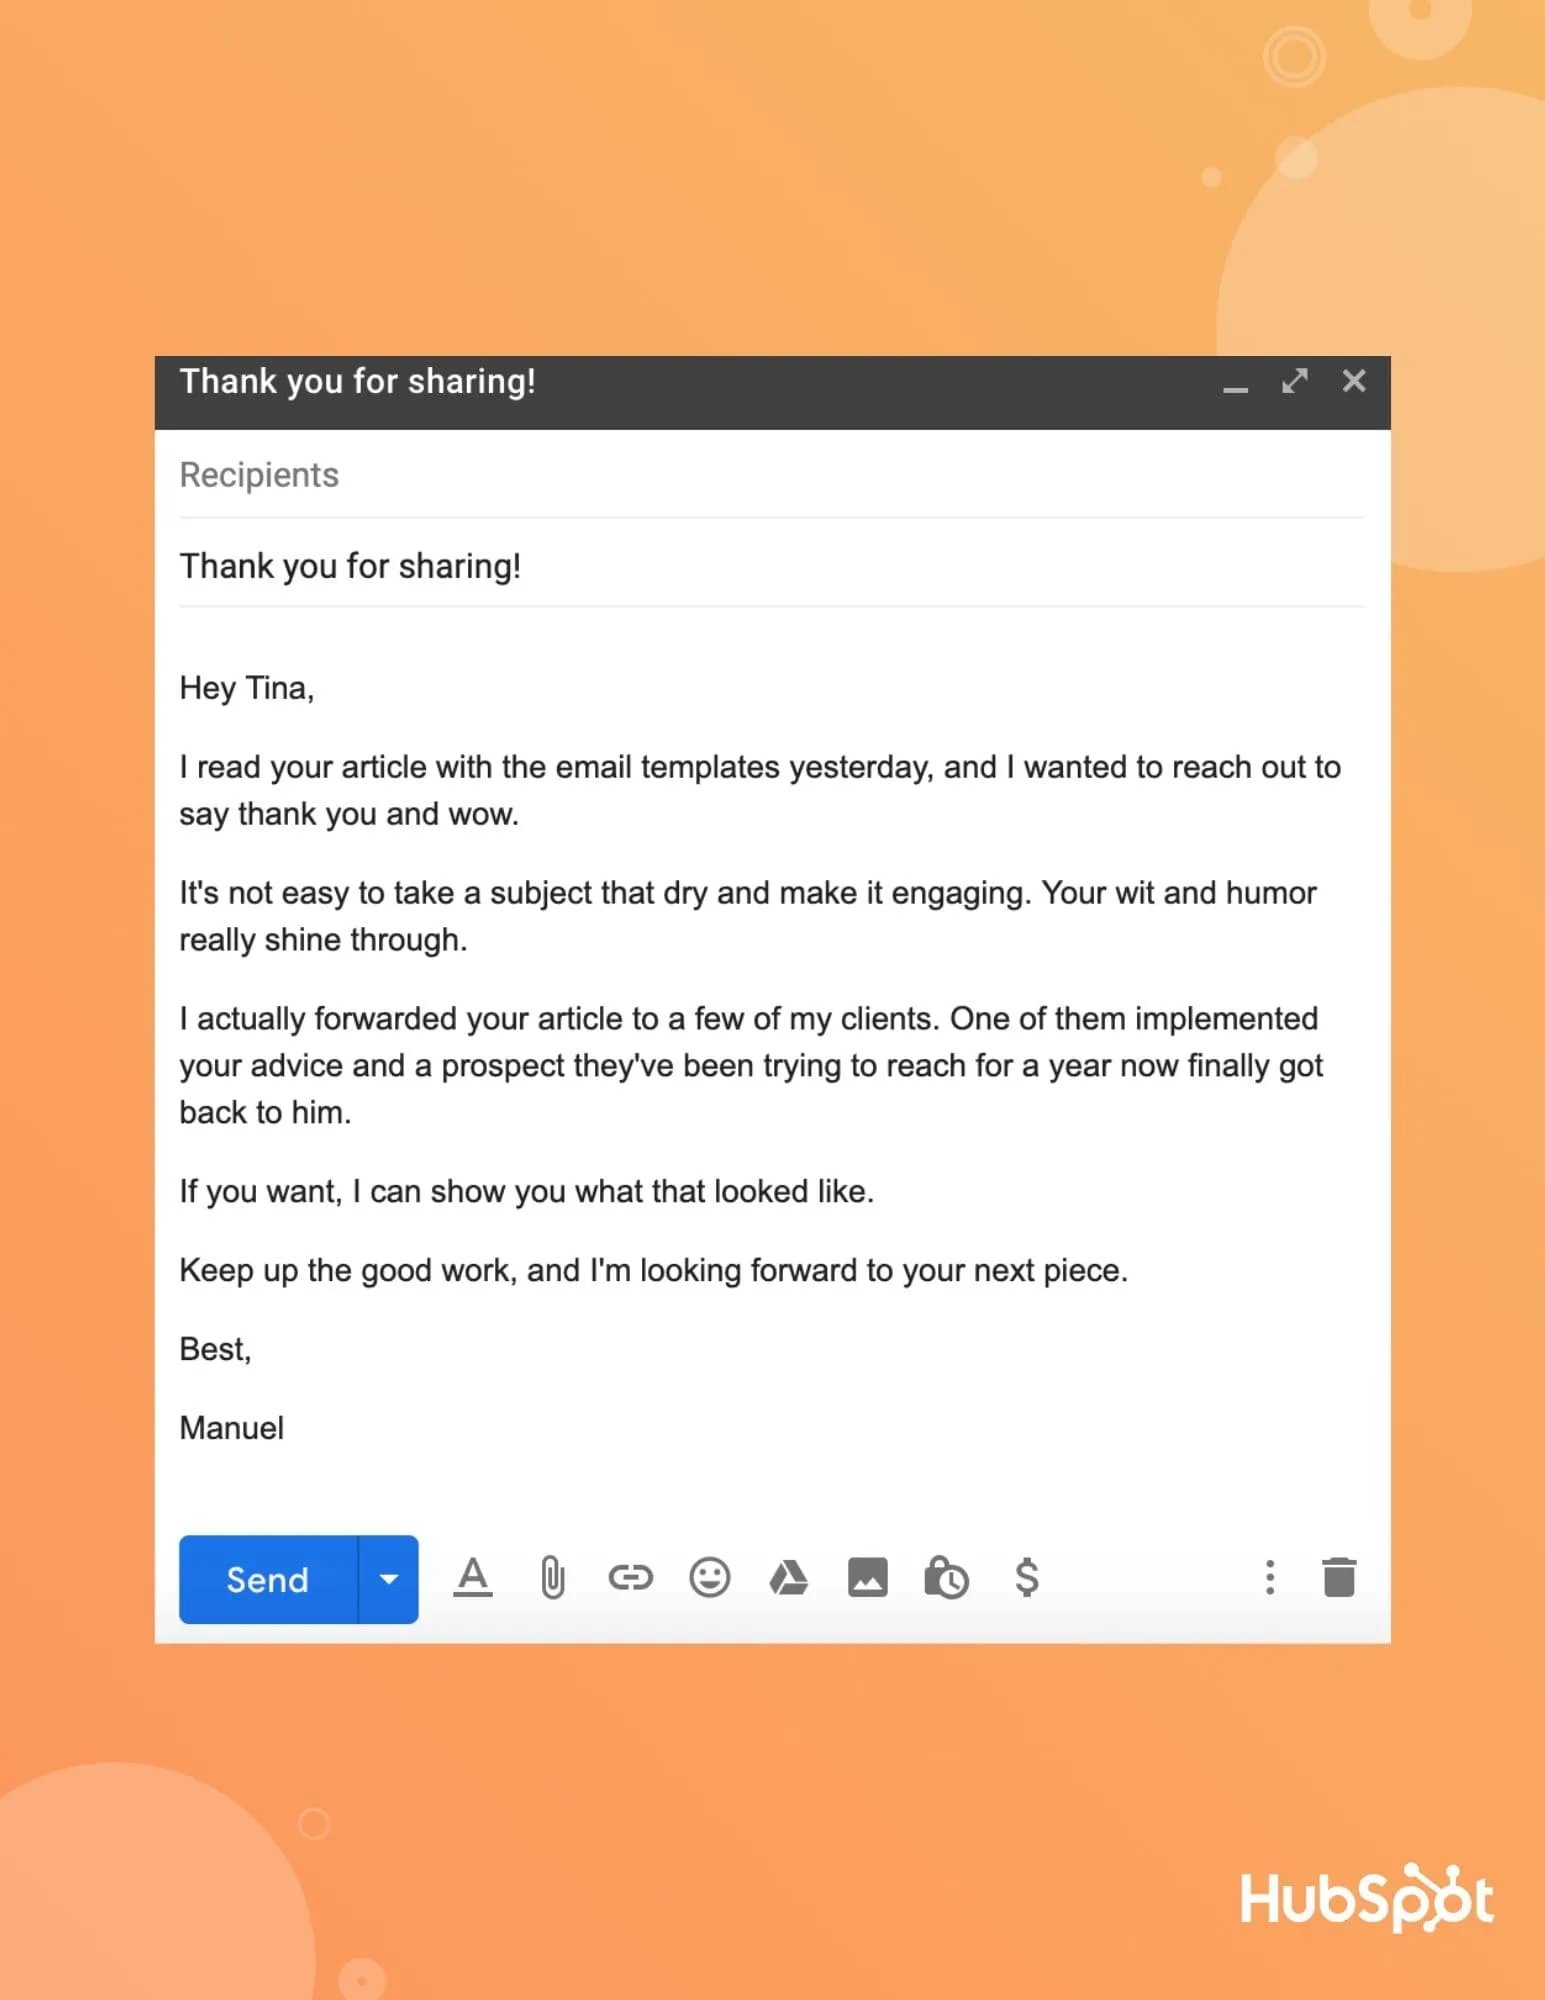 30 Sales Prospecting Email Templates Guaranteed to Start a Relationship